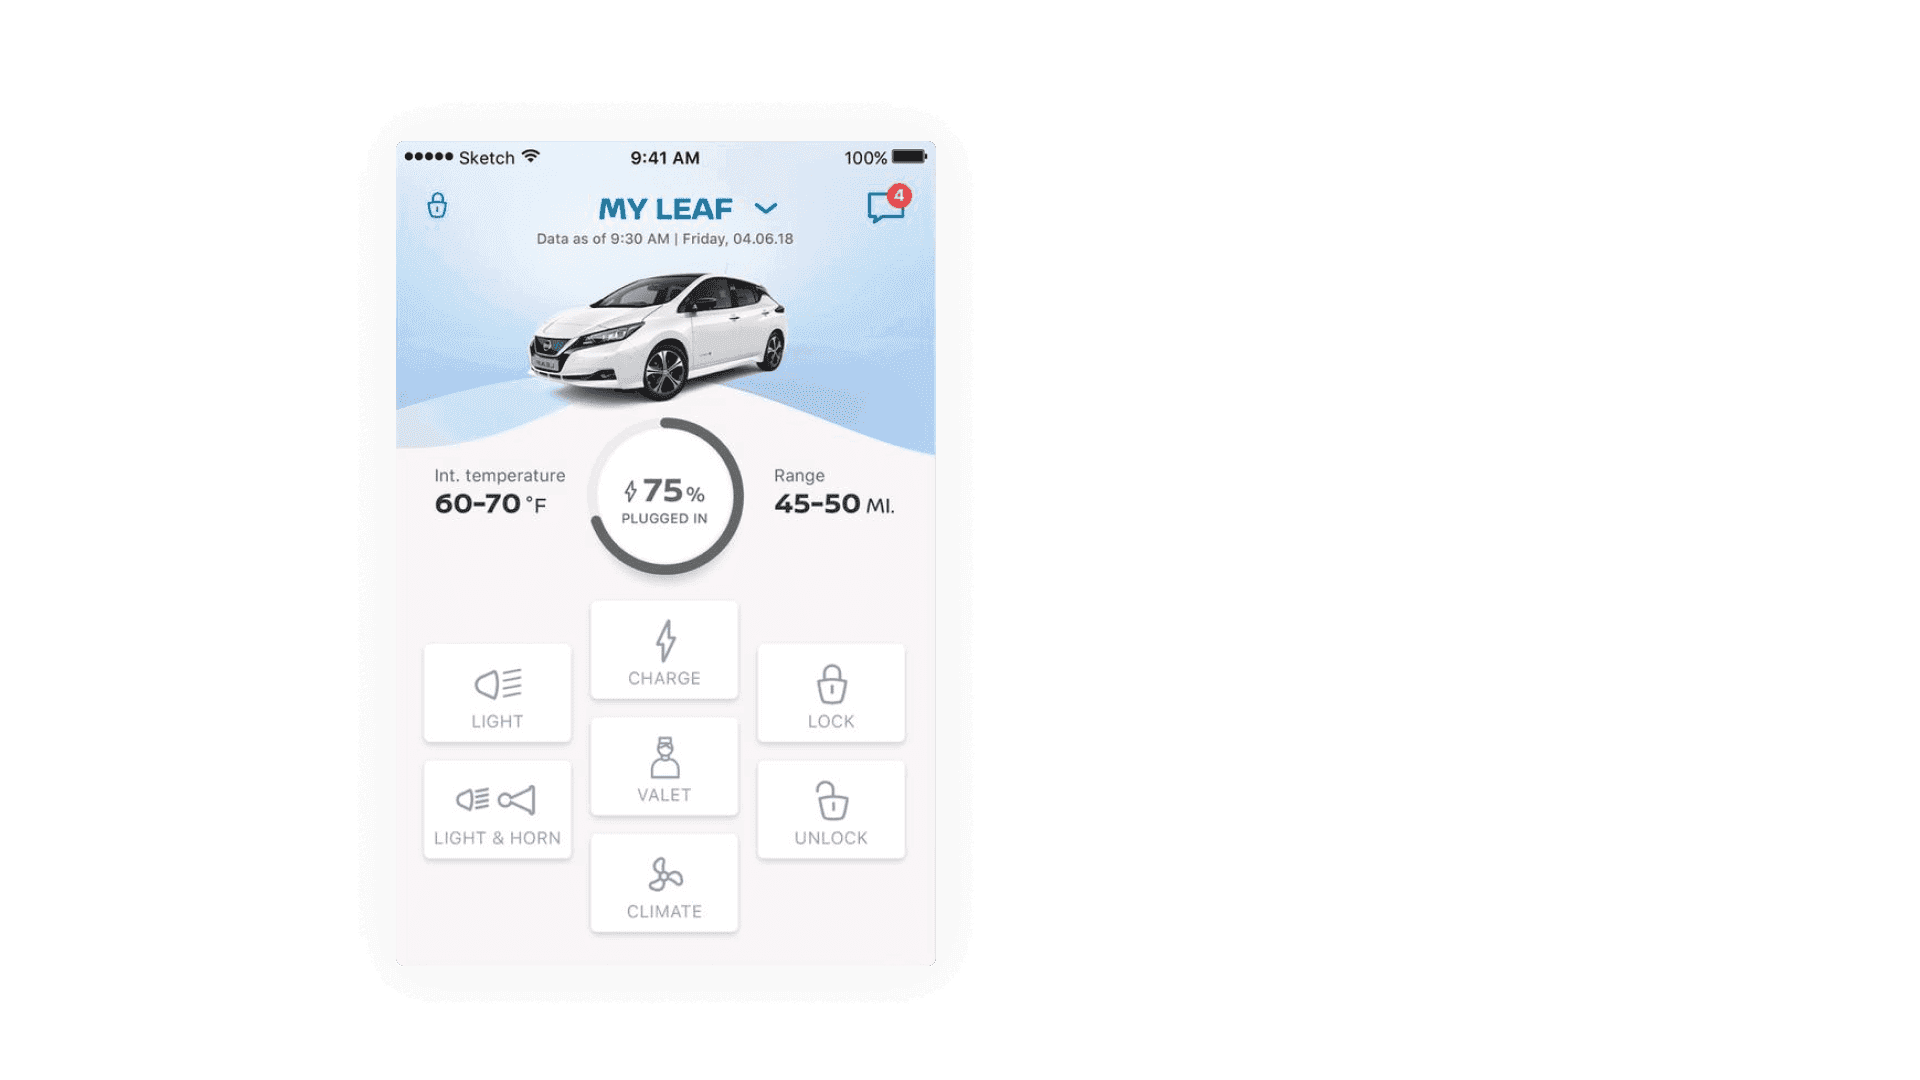 Prototype of the Nissan Leaf application on the home screen